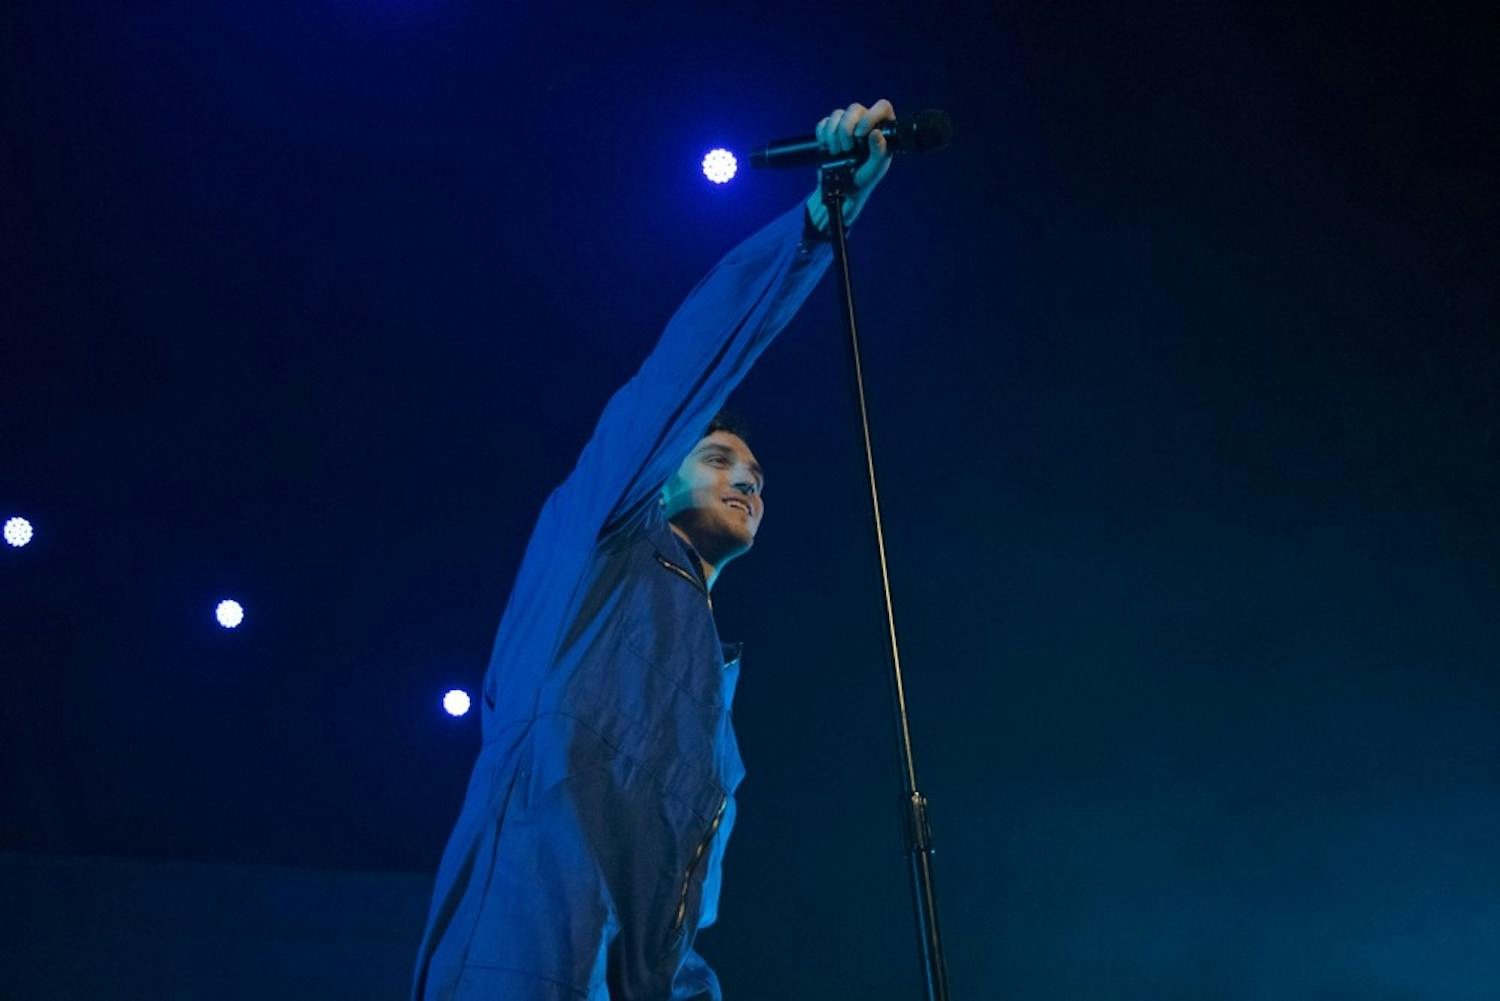 Lauv's magnetic stage presence combined with his obvious love for performing electrified the theater and gave the audience a diverse show filled with fast-paced moments and slow ballads.